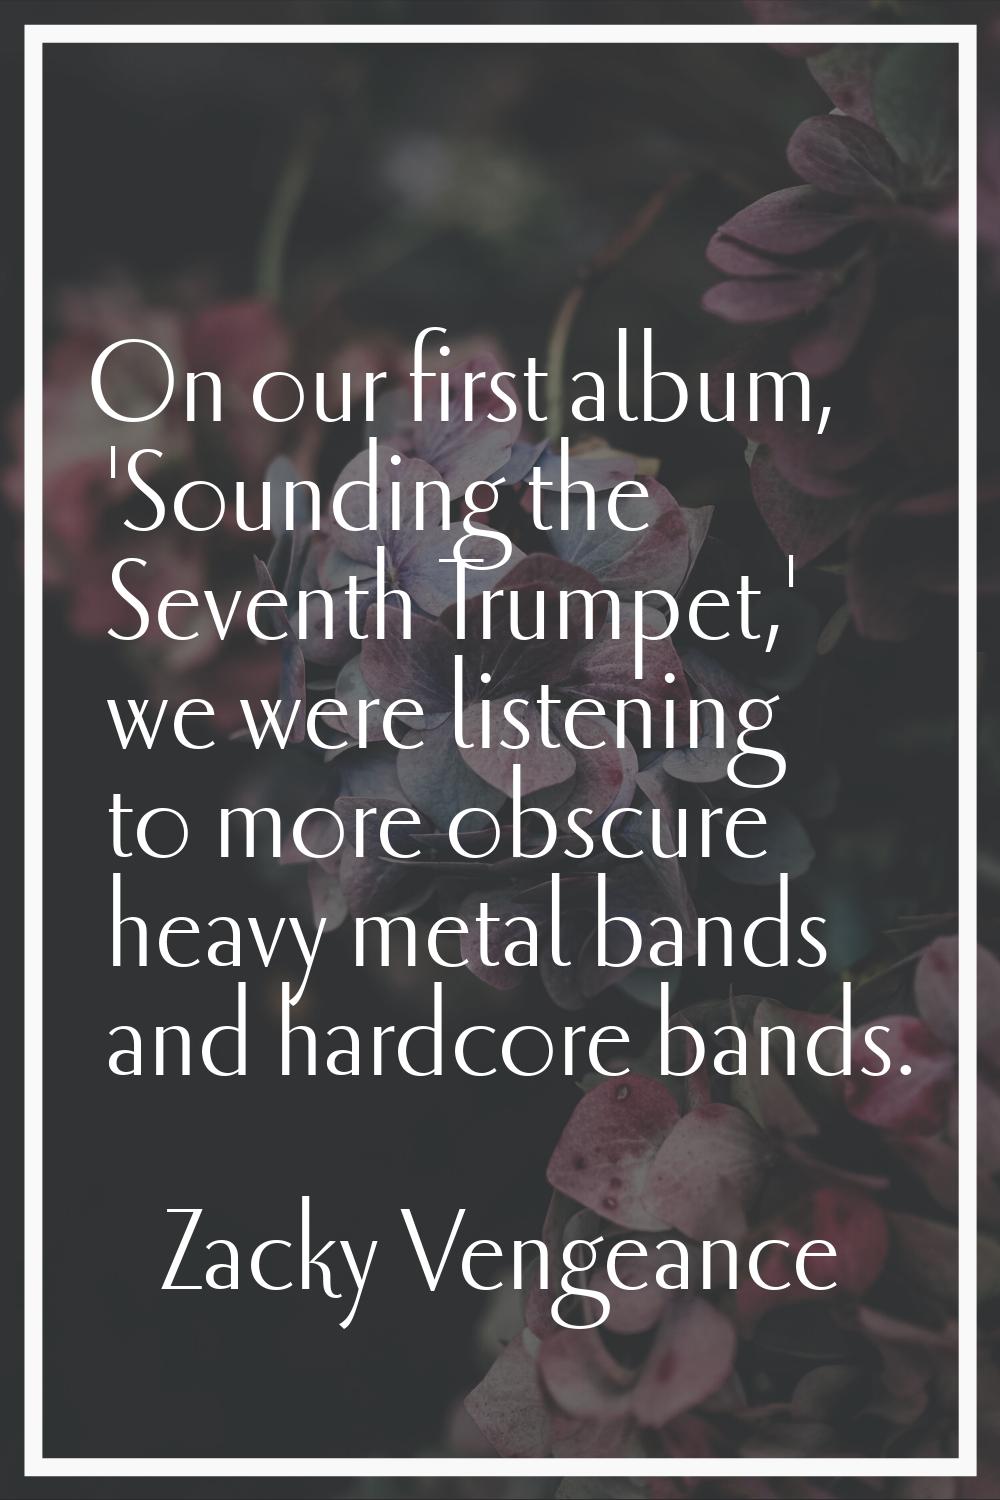 On our first album, 'Sounding the Seventh Trumpet,' we were listening to more obscure heavy metal b